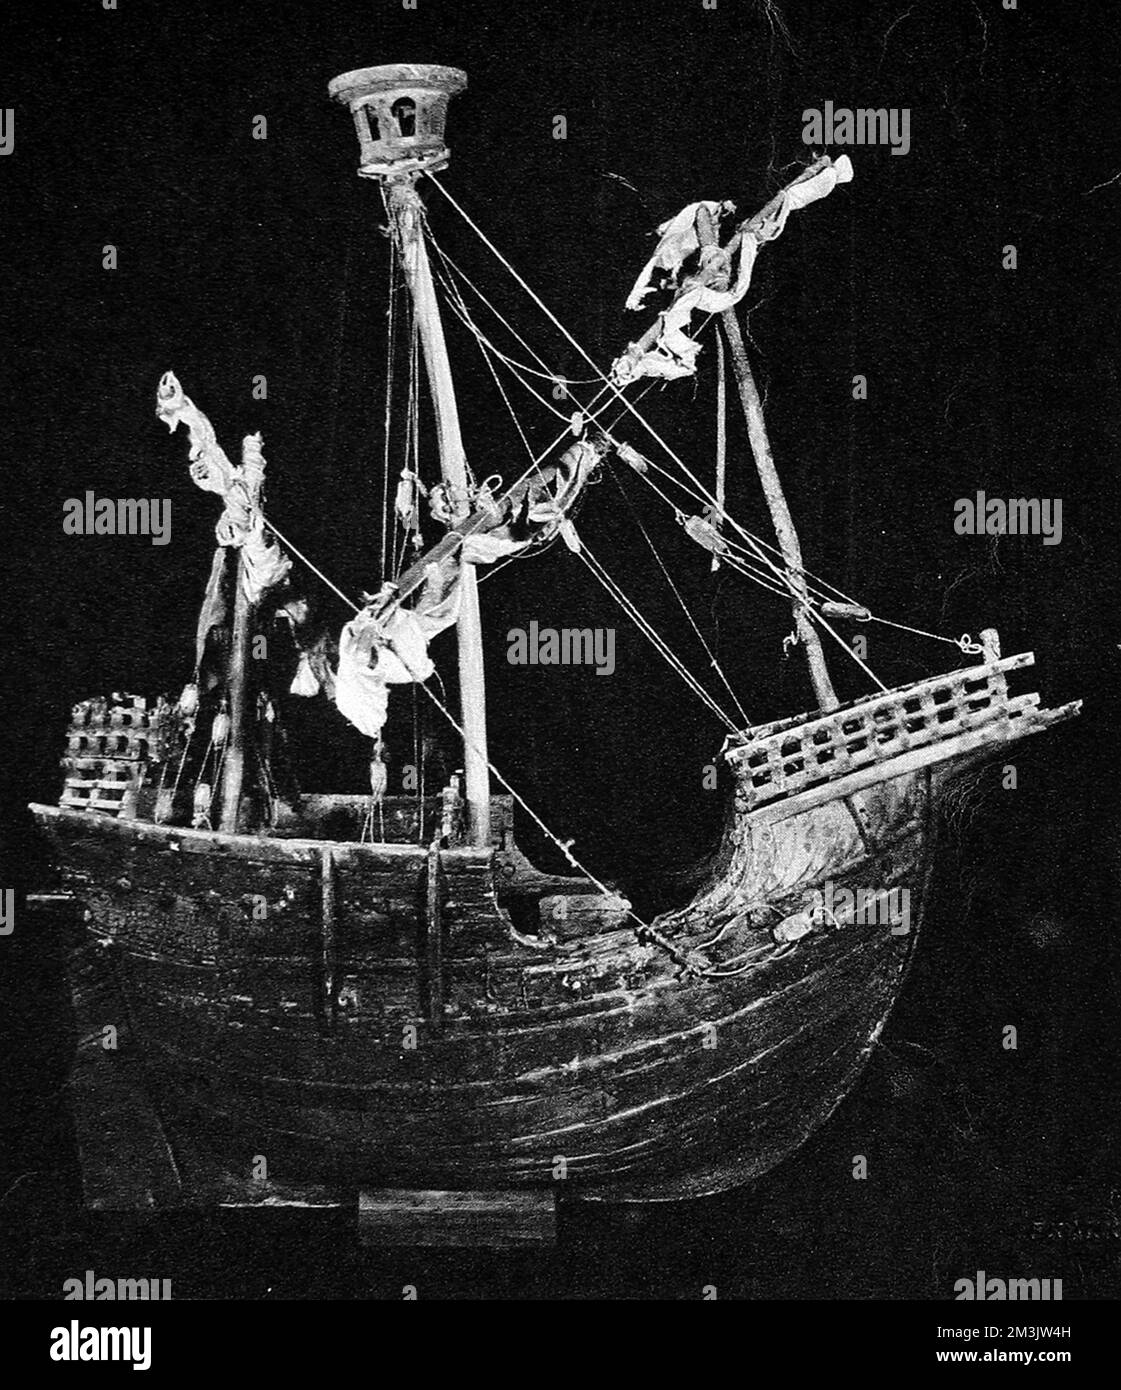 Photograph of a ship model, probably built circa 1450, that was hung as a Votive offering in the Chapel of the town of Mataro, Catalonia, Spain.  By 1930 this model was in The 'Prins Hendrik' Maritime Museum, Rotterdam, having been bought from the Reinhardt Galleries, New York. This was an extremely rare model of a 15th century ship made at the time.     Date: 1930 Stock Photo